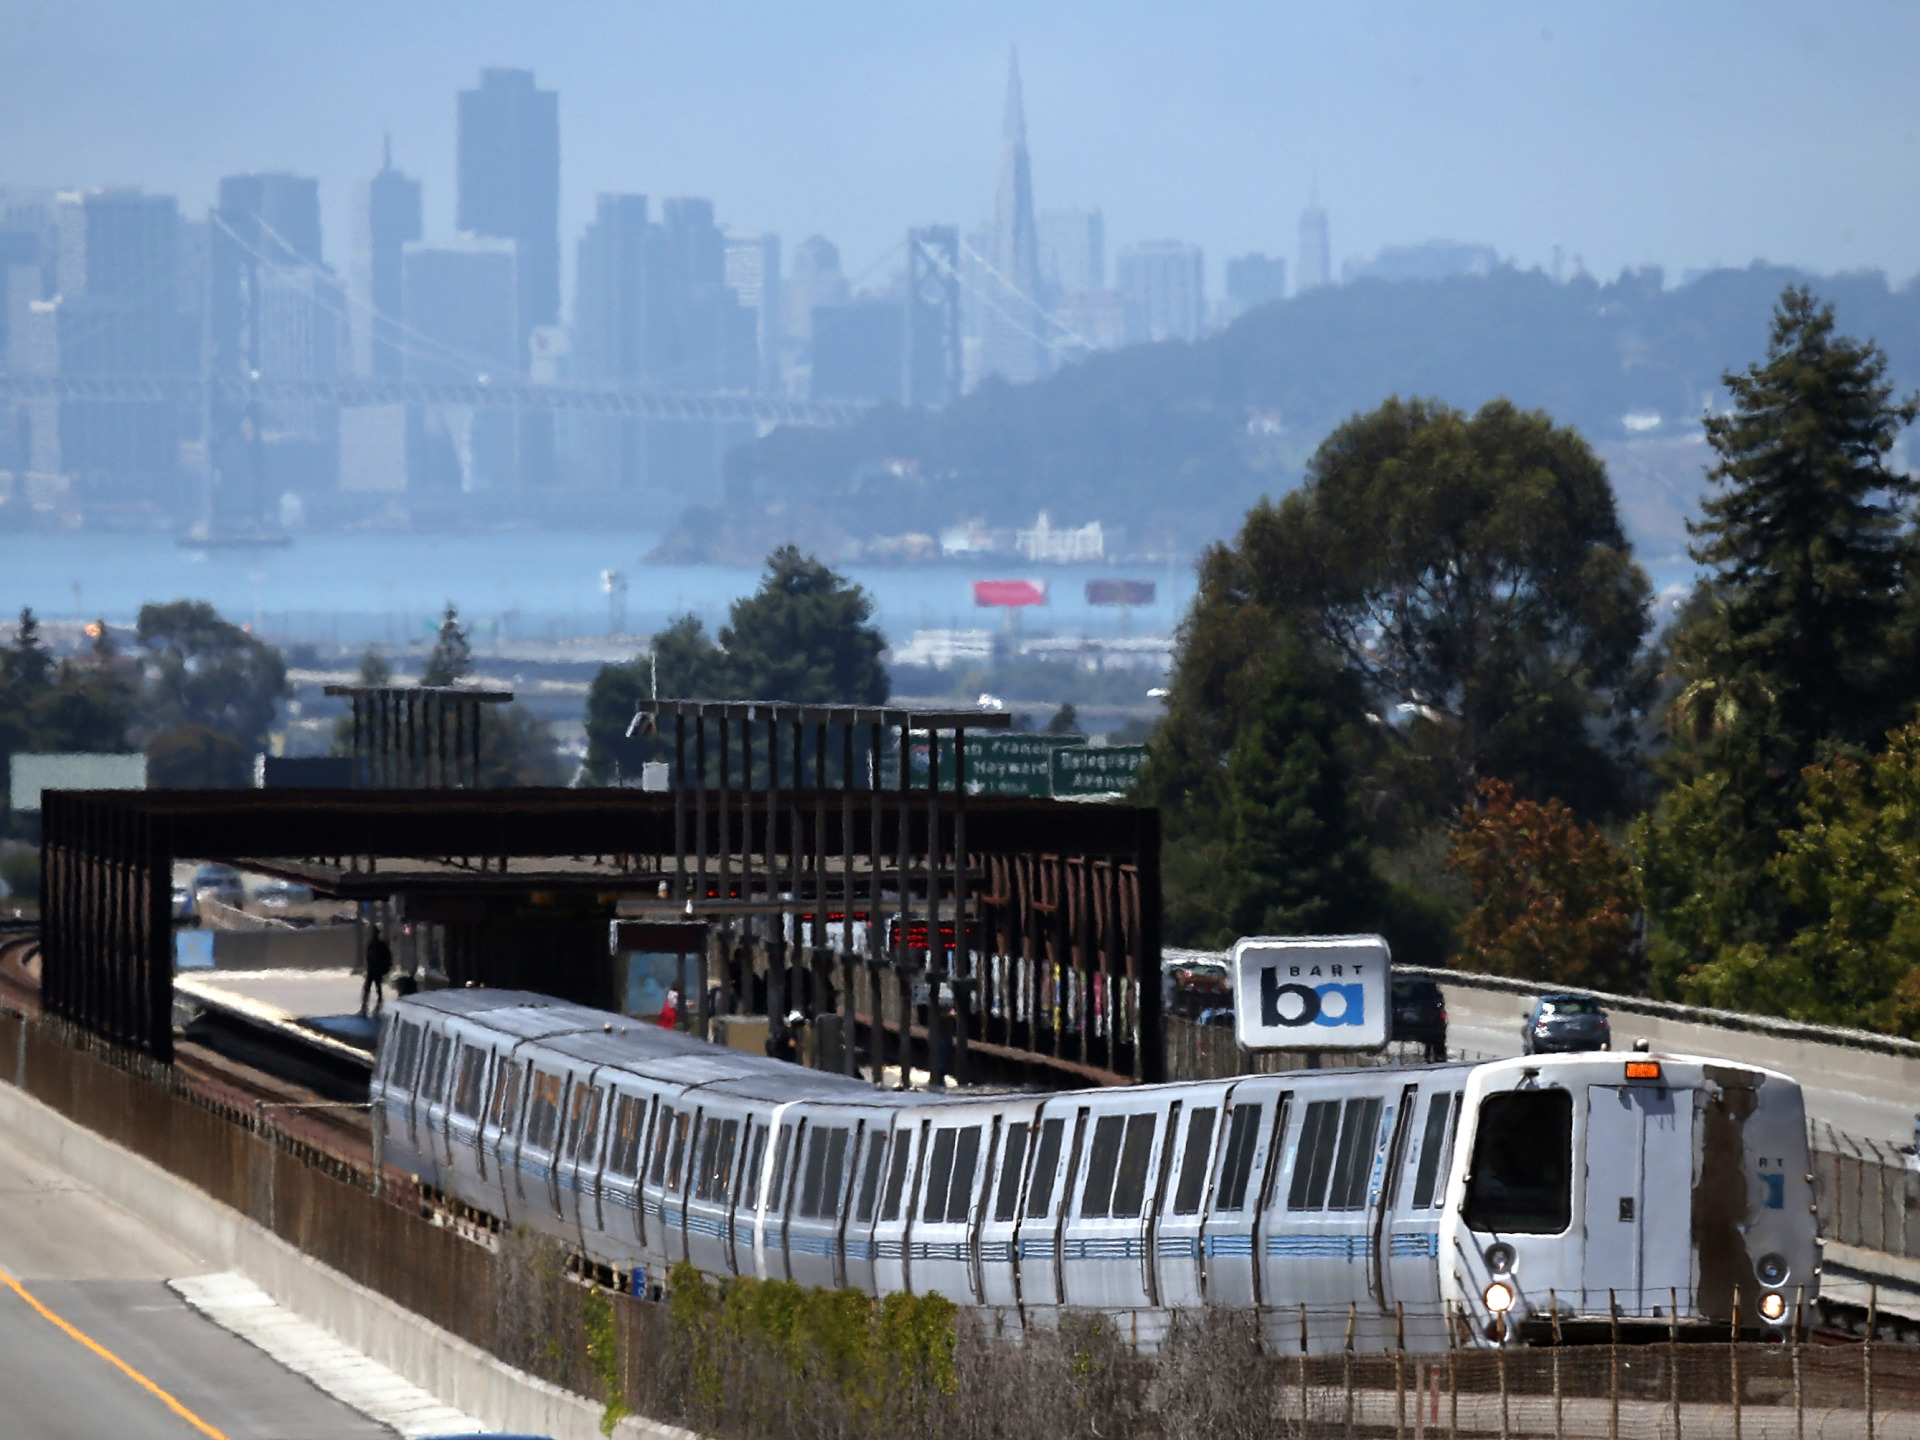 Many respondents said they're resigned to long commutes in order to continue living in the Bay Area.